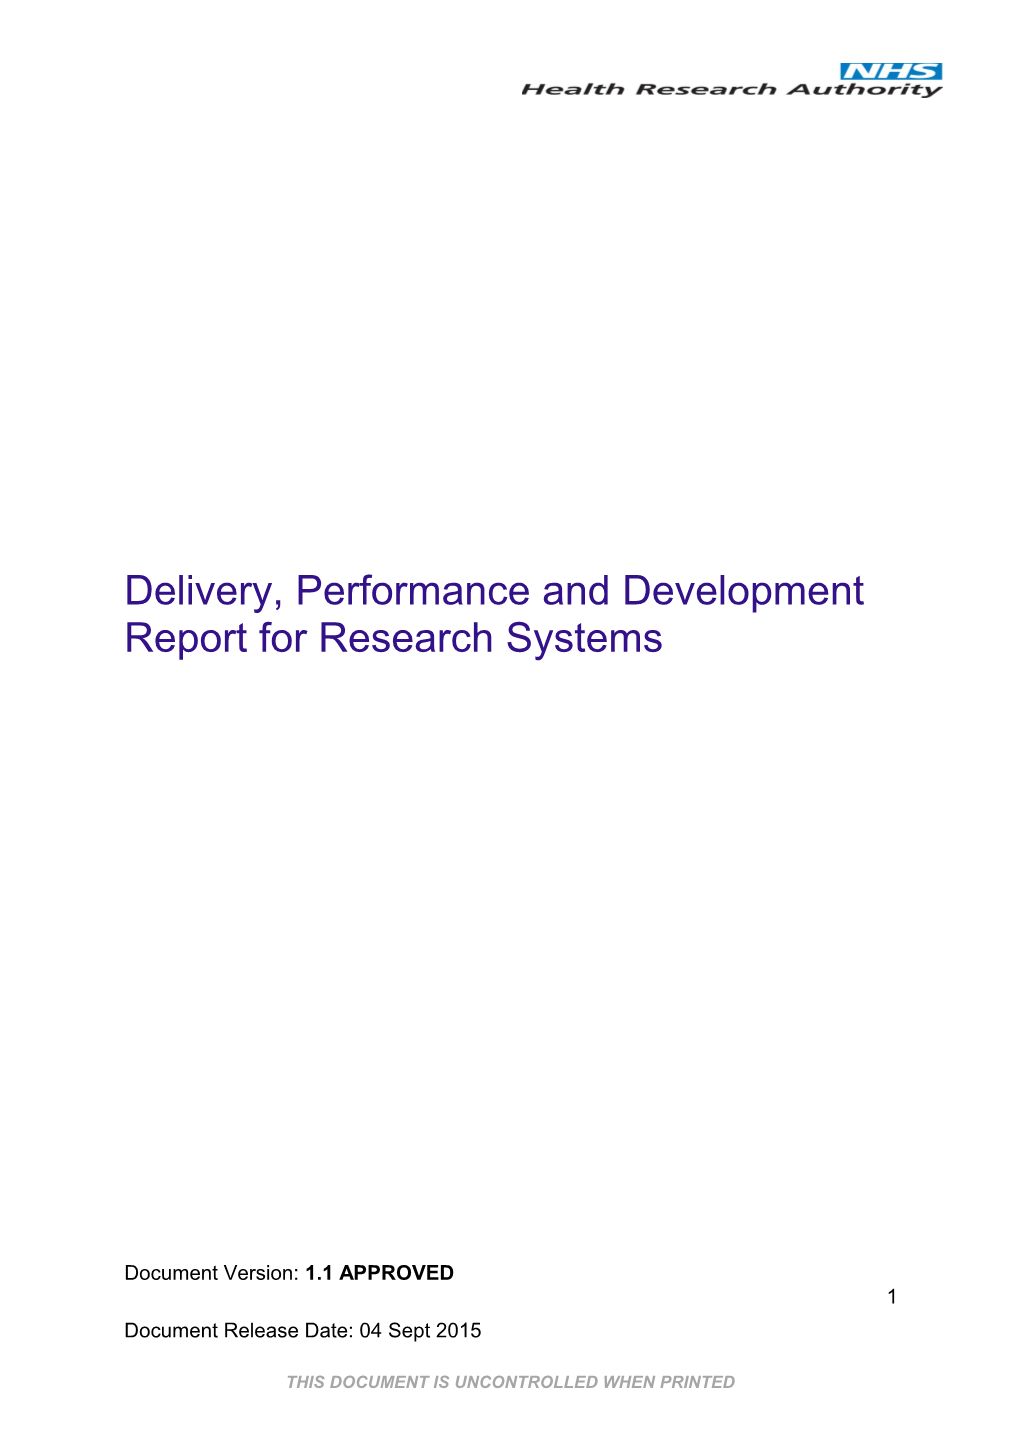 Delivery, Performance and Development Report for Research Systems